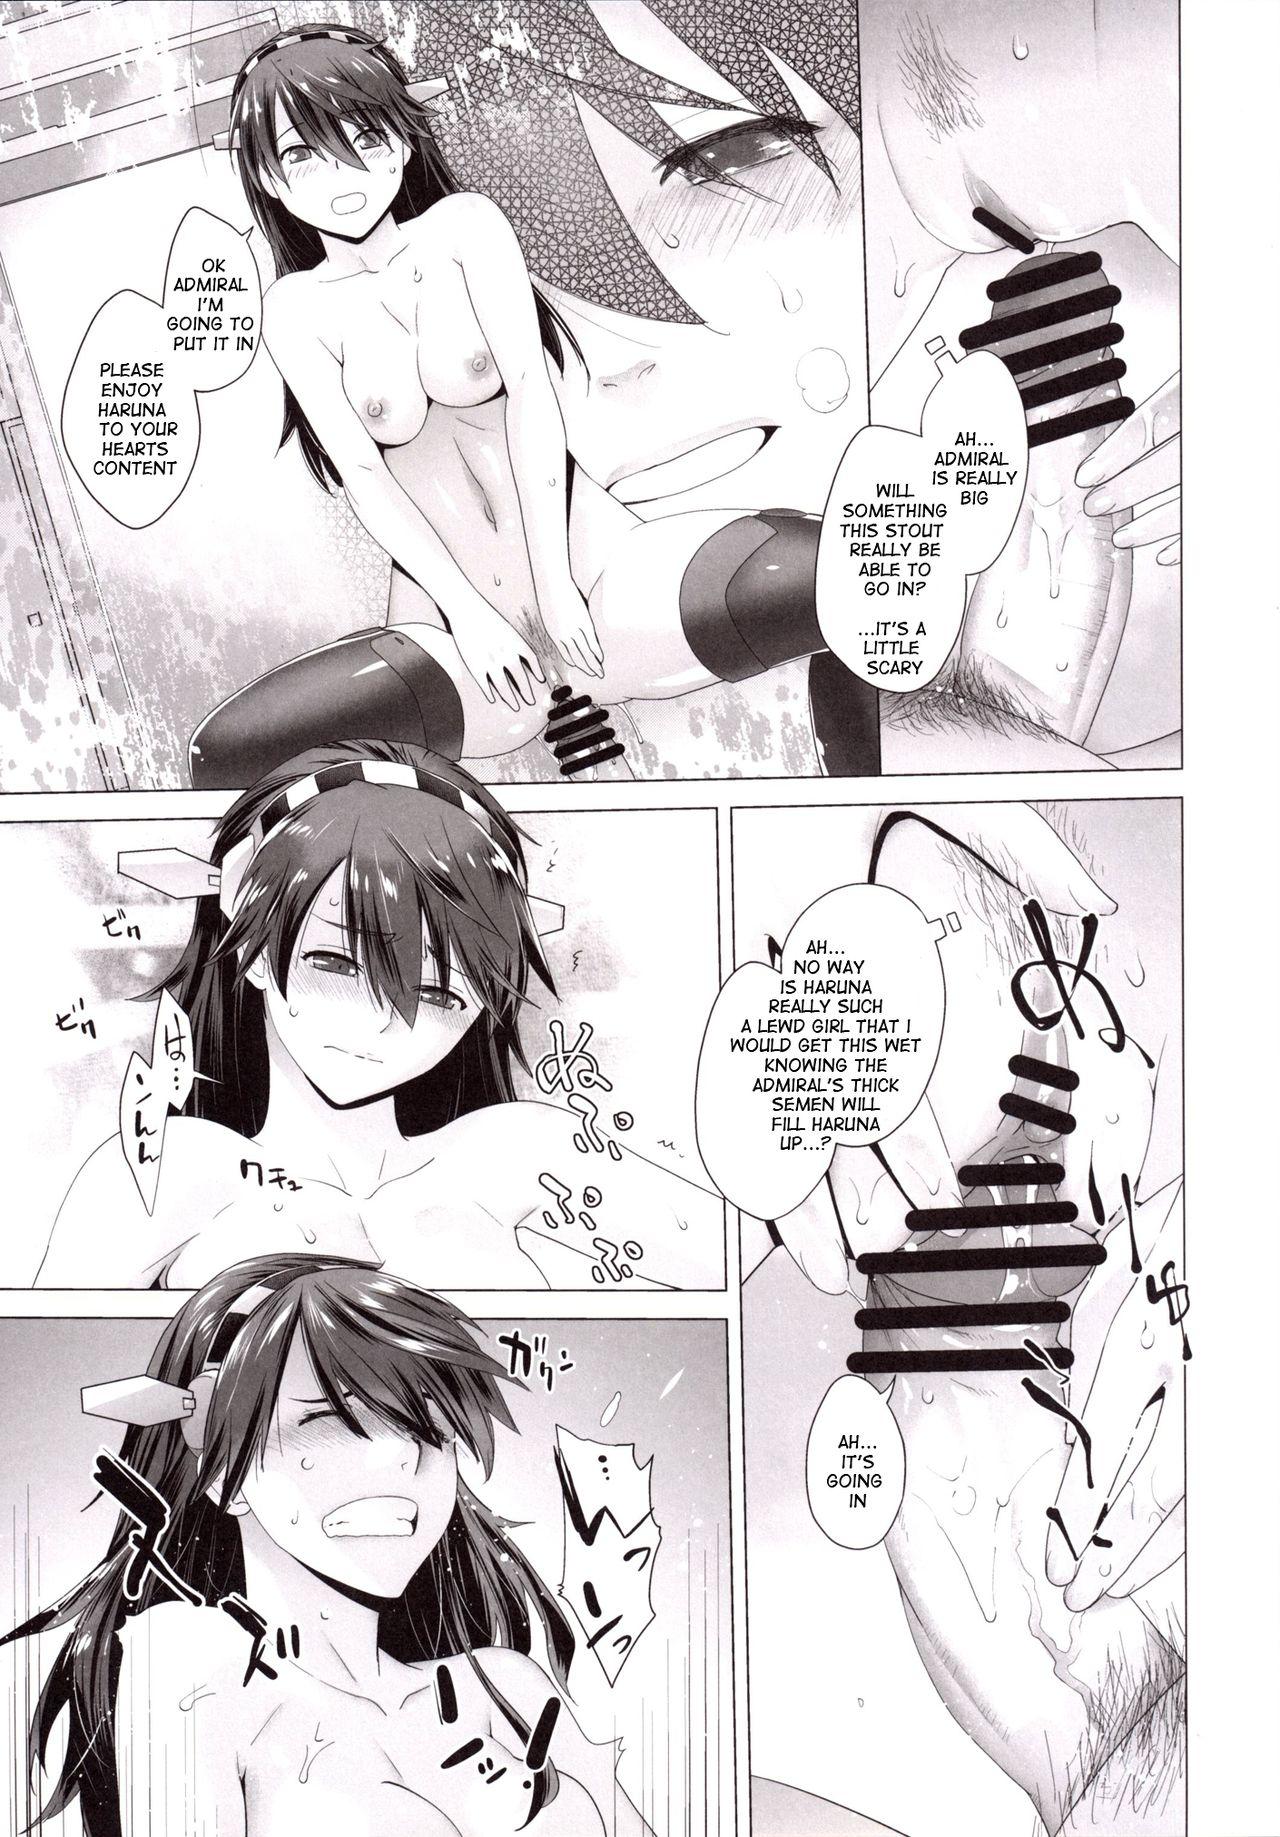 Buttfucking COMING EVENT 3 - Kantai collection Girls - Page 12